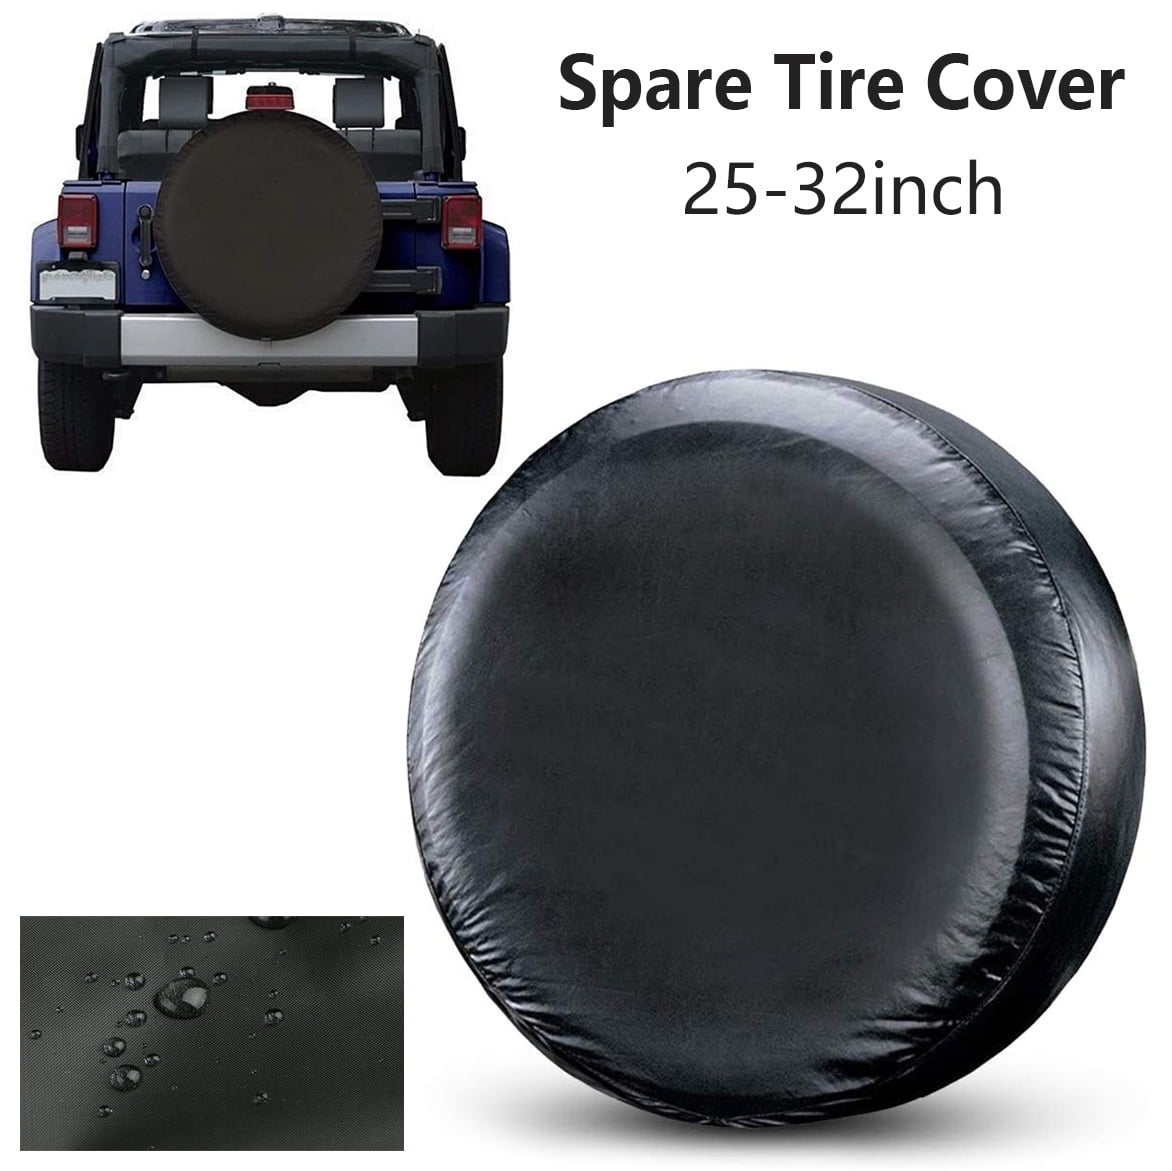 Delerain Dolphins Spare Tire Covers Waterproof Dust-Proof Spare Wheel Cover Universal Fit for Jeep Truck and Many Vehicle SUV RV Trailer 17 Inch for Diameter 31-33